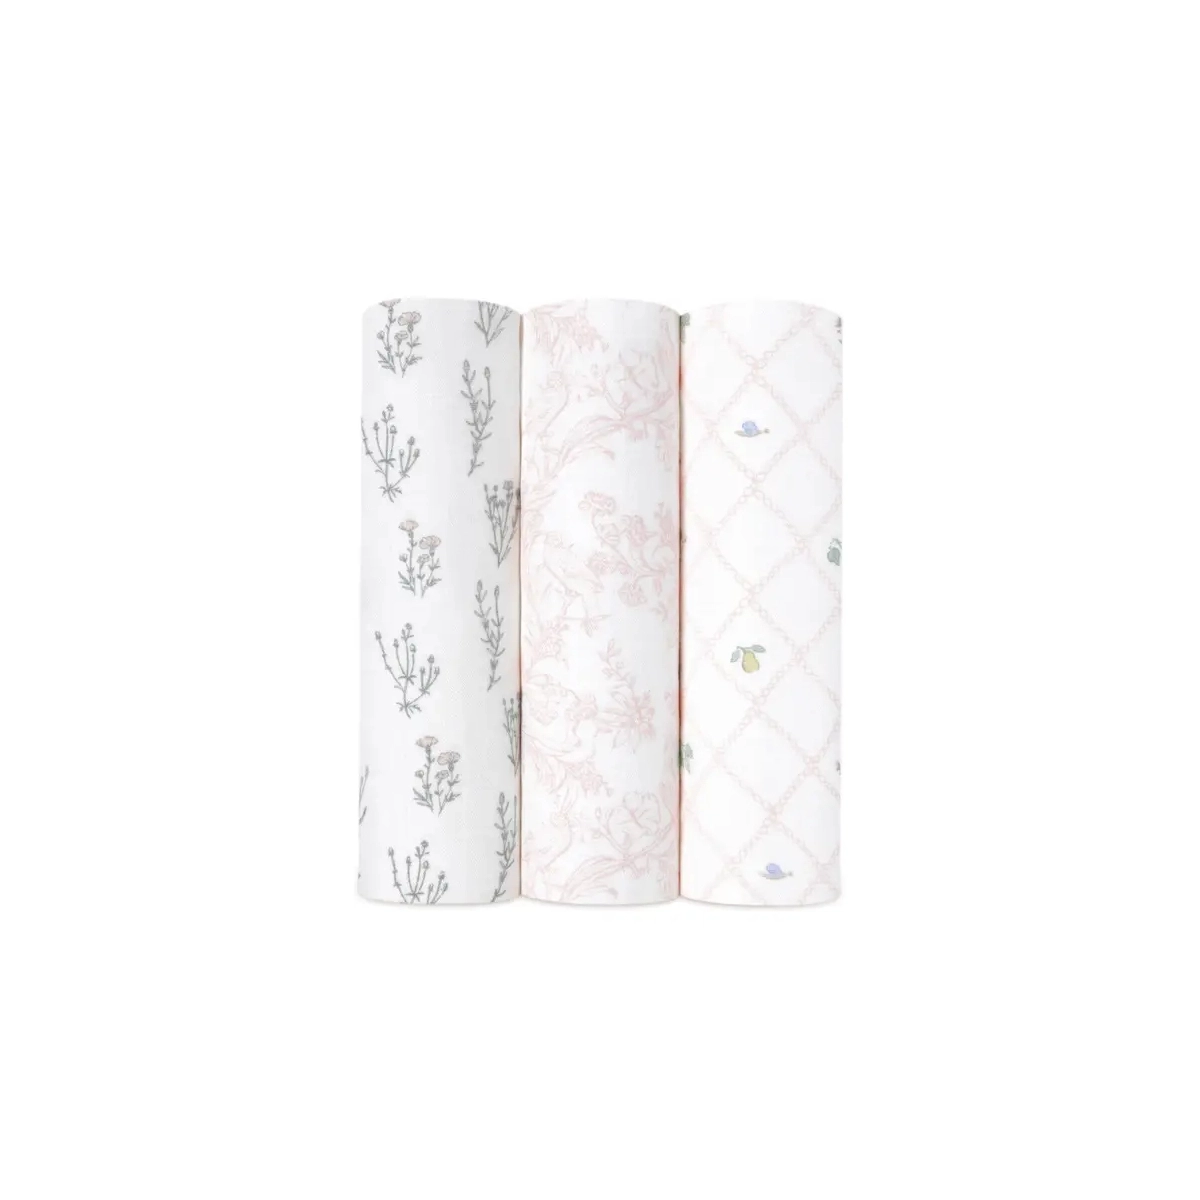 Image of Aden + Anais Pack of 3 Large Swaddle Silky Soft - French Floral (23-19-075)